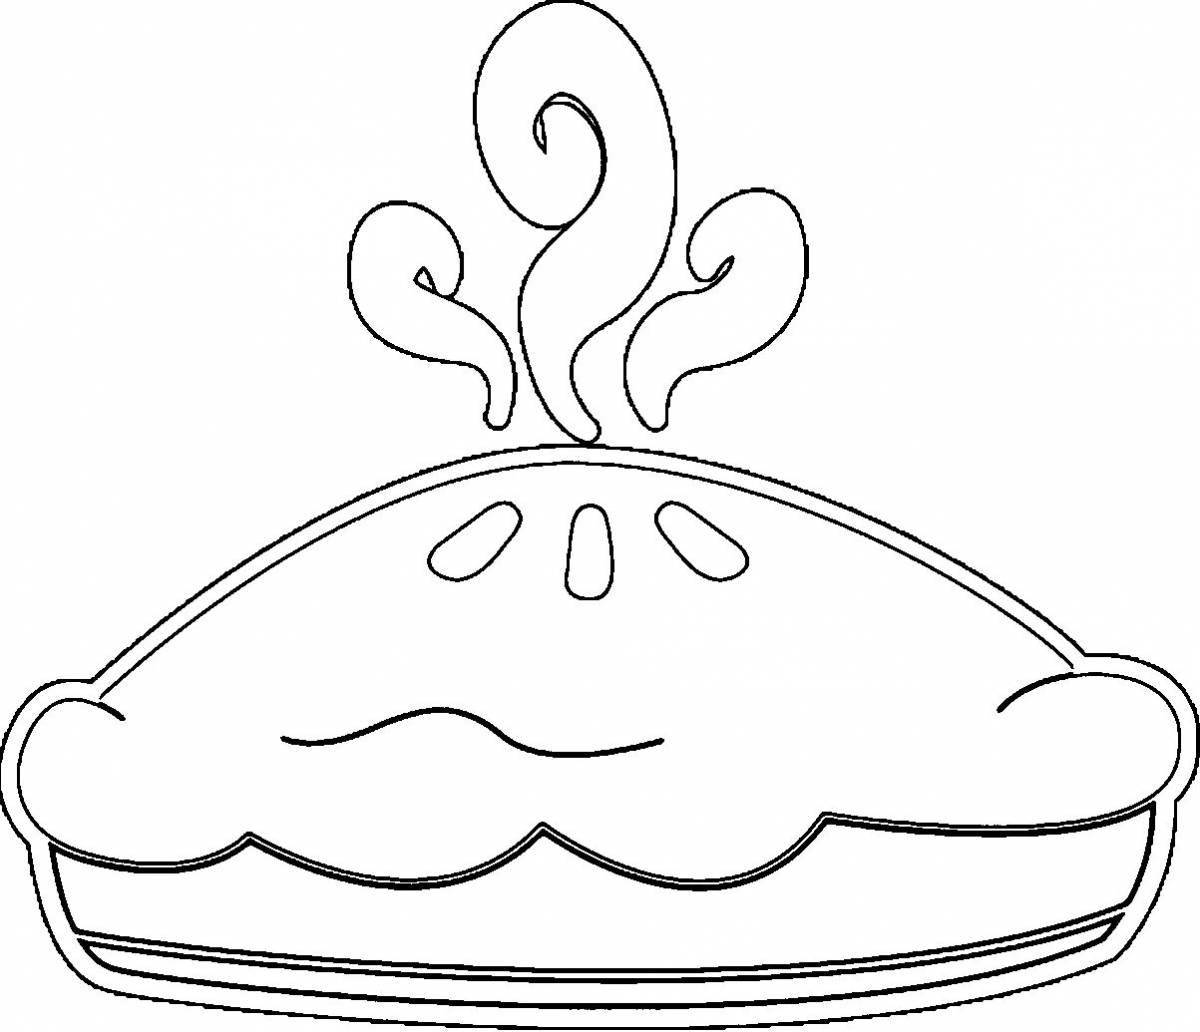 Tempting casserole coloring page